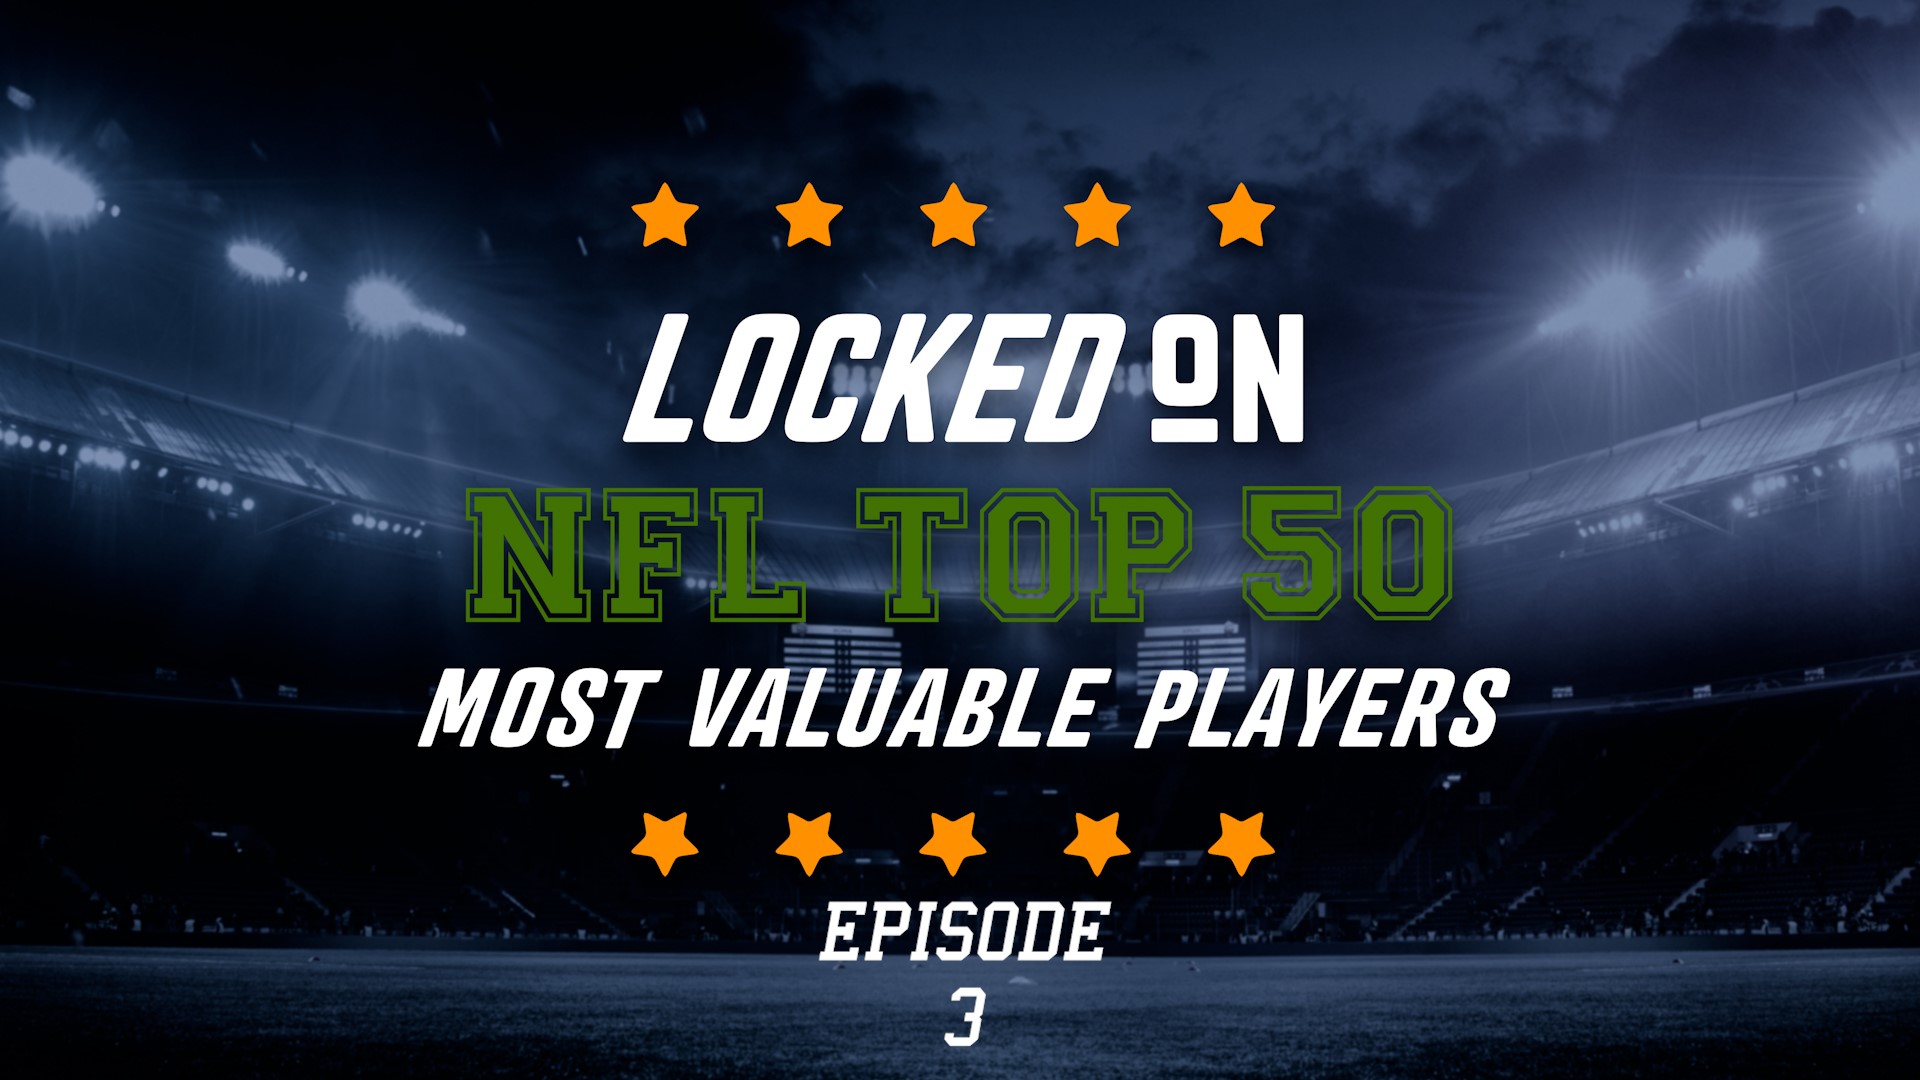 Episode 3 breaks down the most valuable players to their teams, according to BetOnline